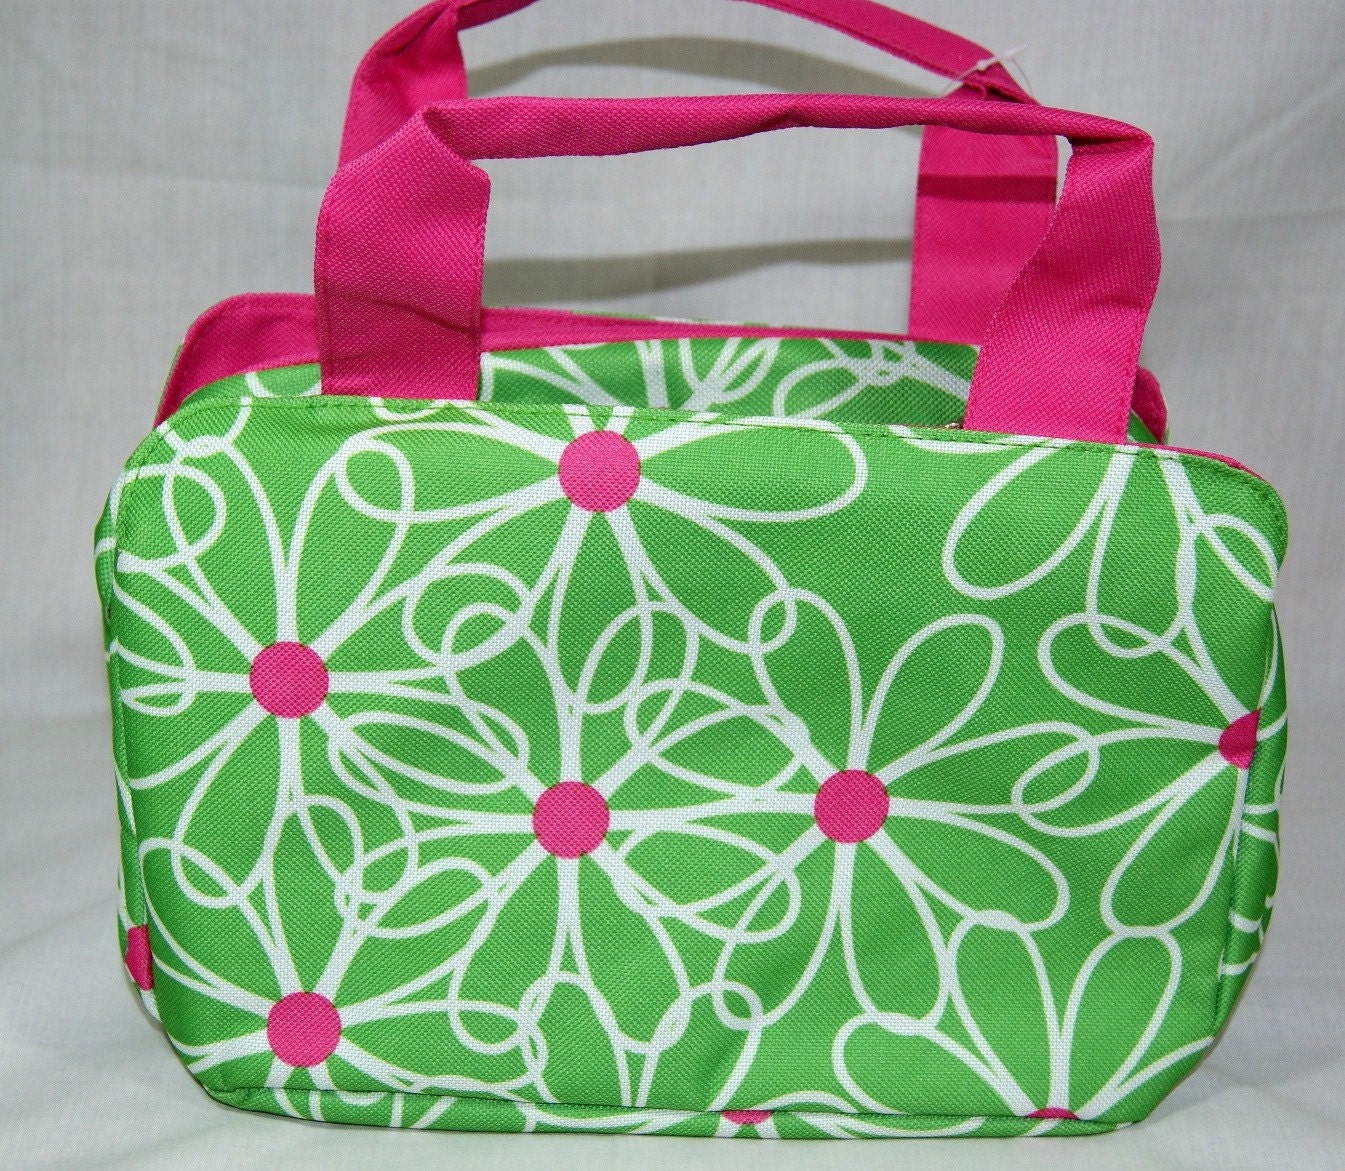 Personalized insulated lunch tote - Green with white daisies